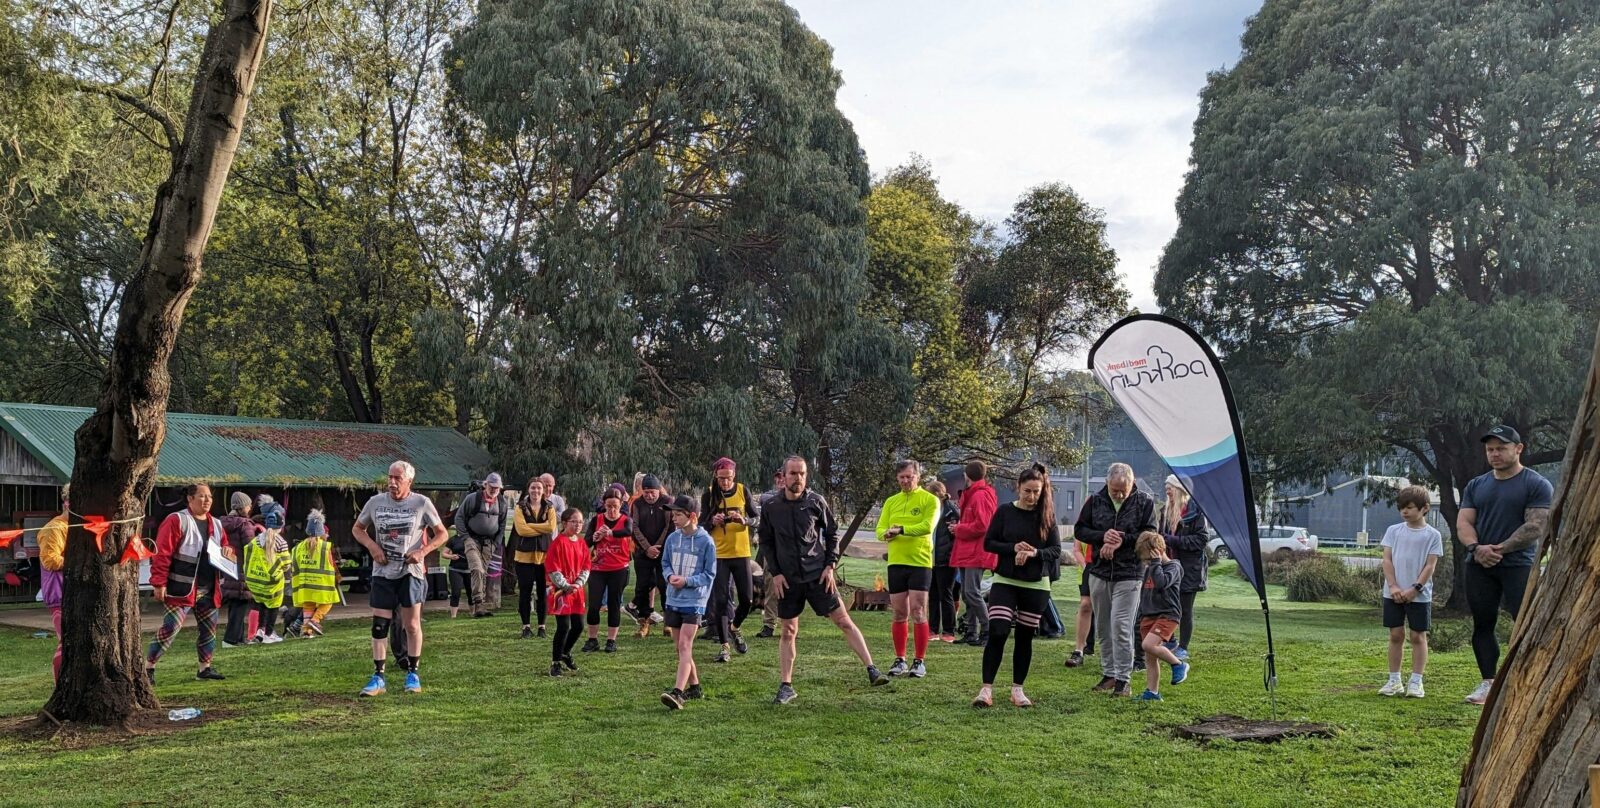 Runners and walkers crossing the starting line at Geeveston parkrun